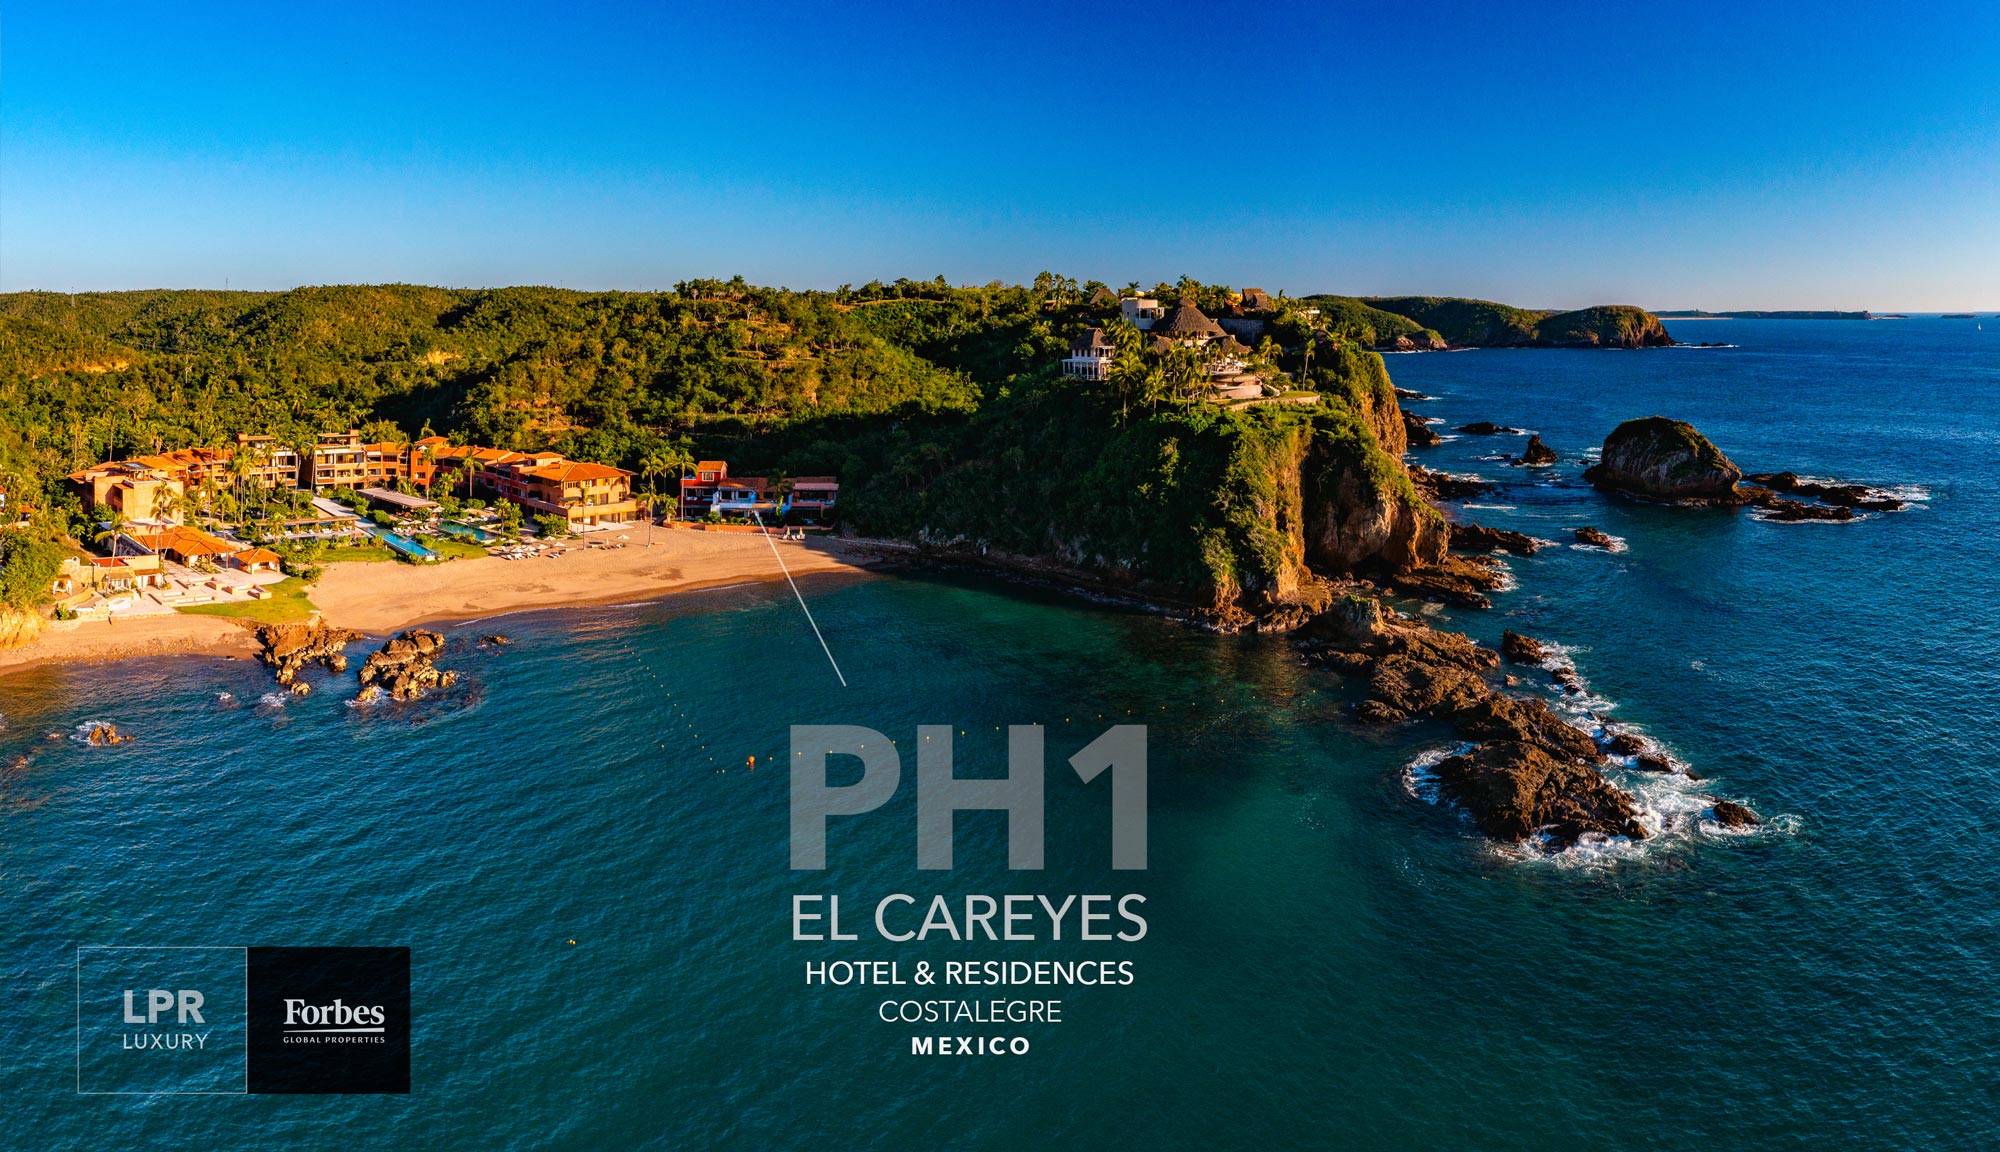 El Careyes Residences -Penthouse 1 - Costa Careyes, Costalegre, Jalisco, Mexico luxury real estate and vacation rentals